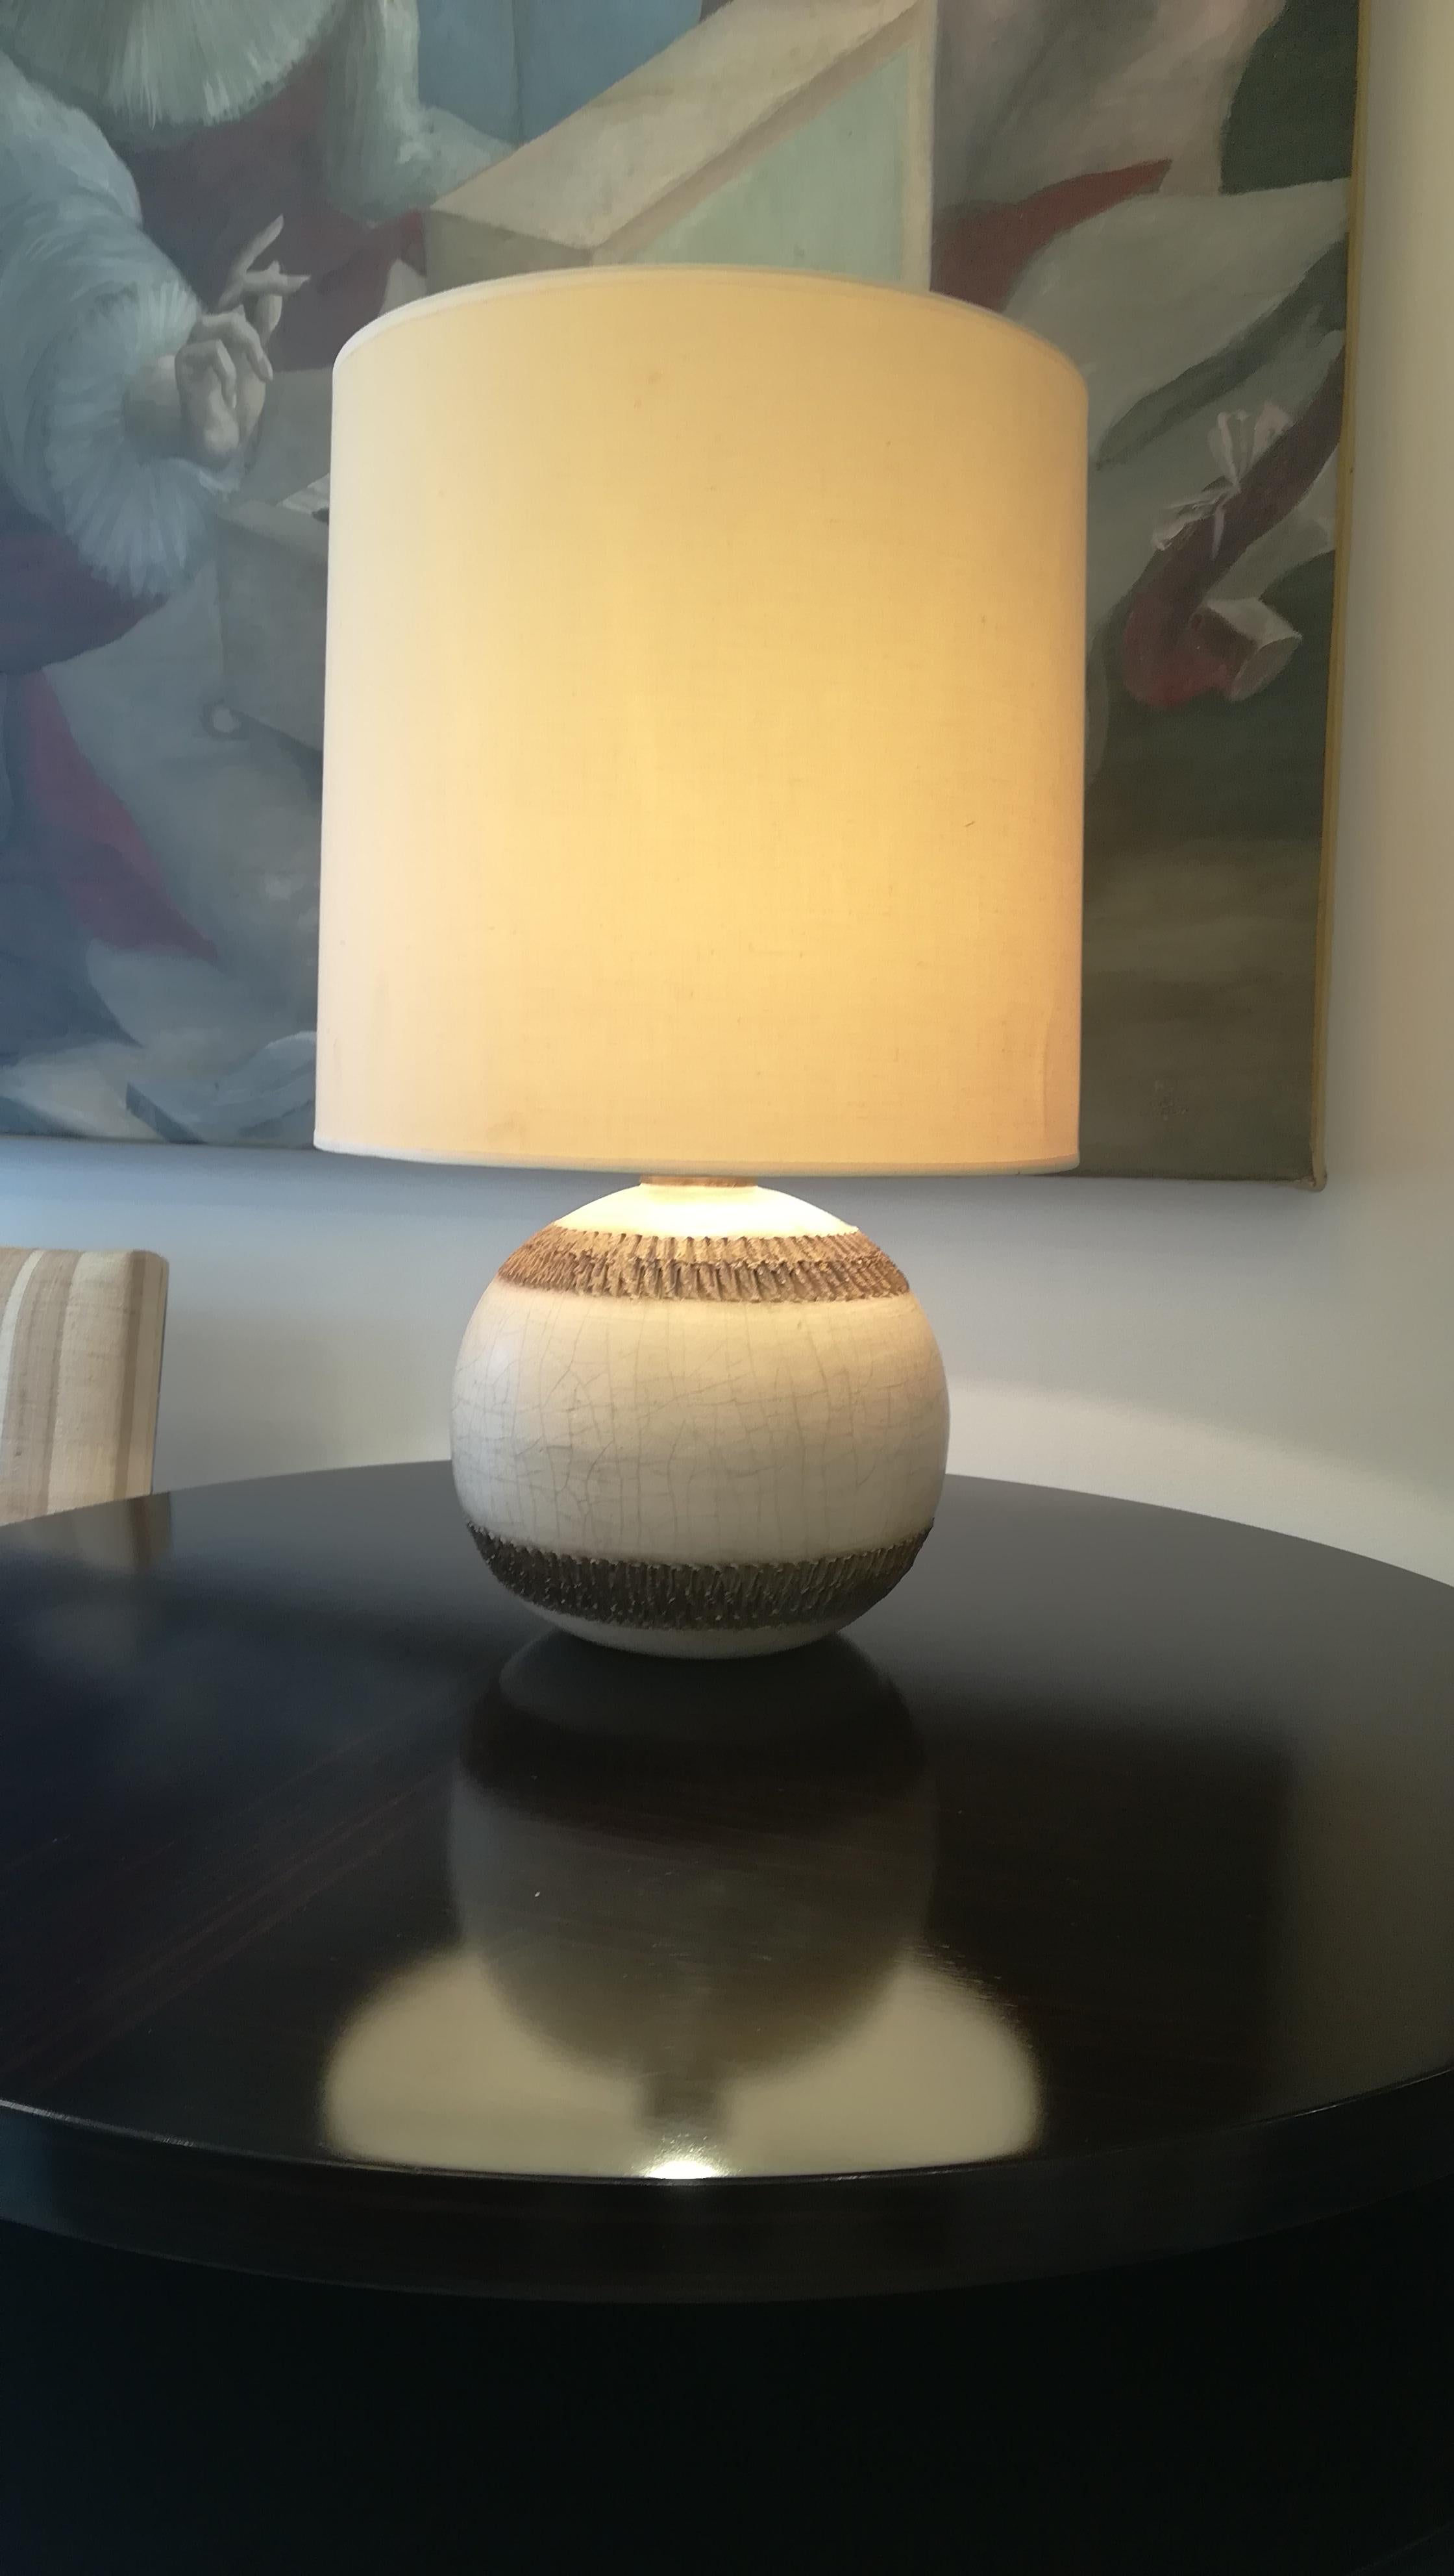 Jean Besnard ceramic table lamp circa 1930, signed
Dimension without lampshade: 25cm.